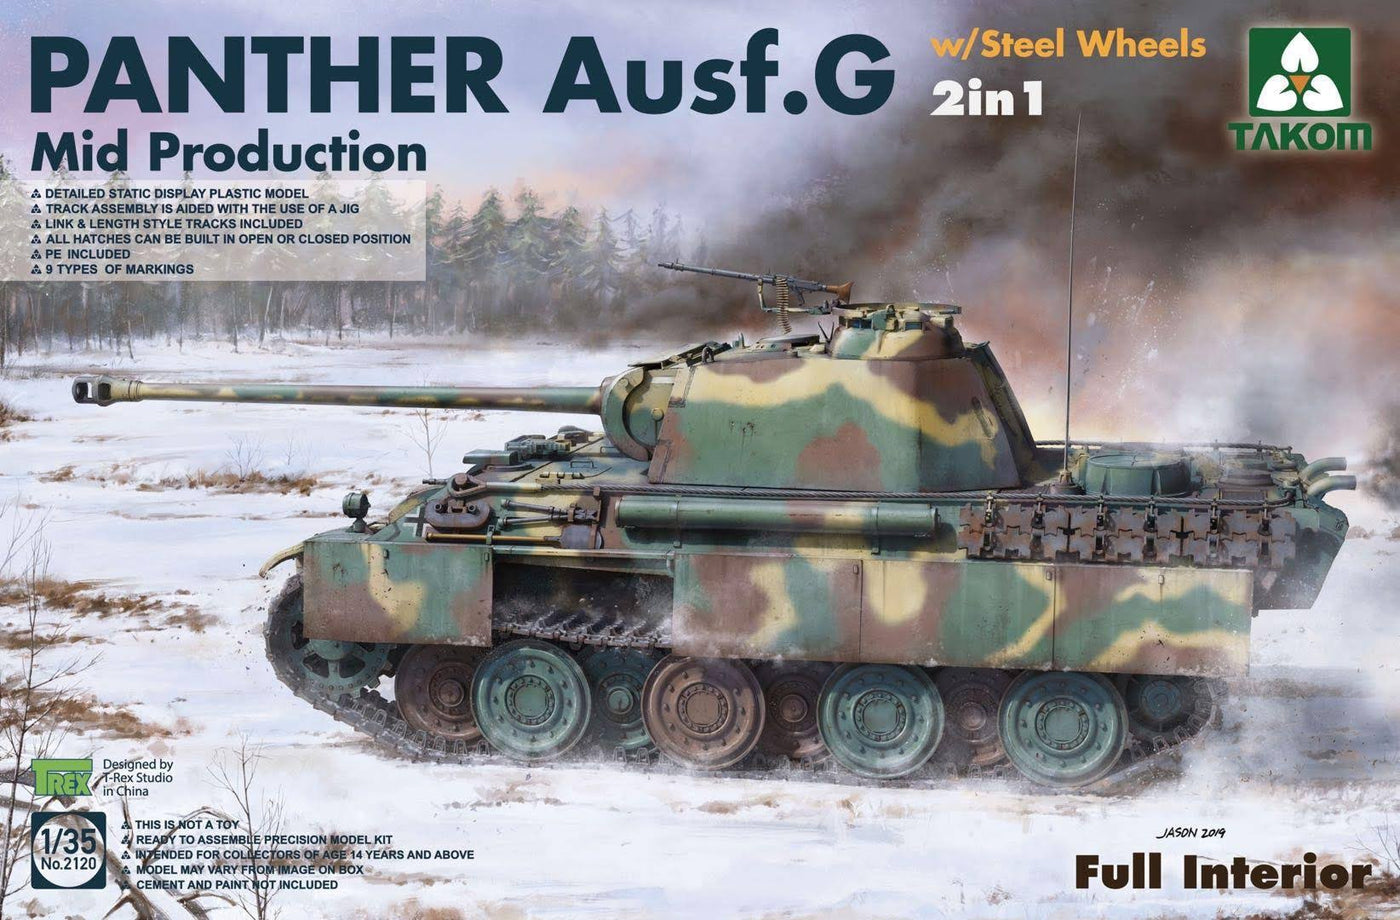 2120 1/35 WWII German Panther Ausf.G Mid production w/ Steel Wheels 2 in 1 Plastic Model Kit